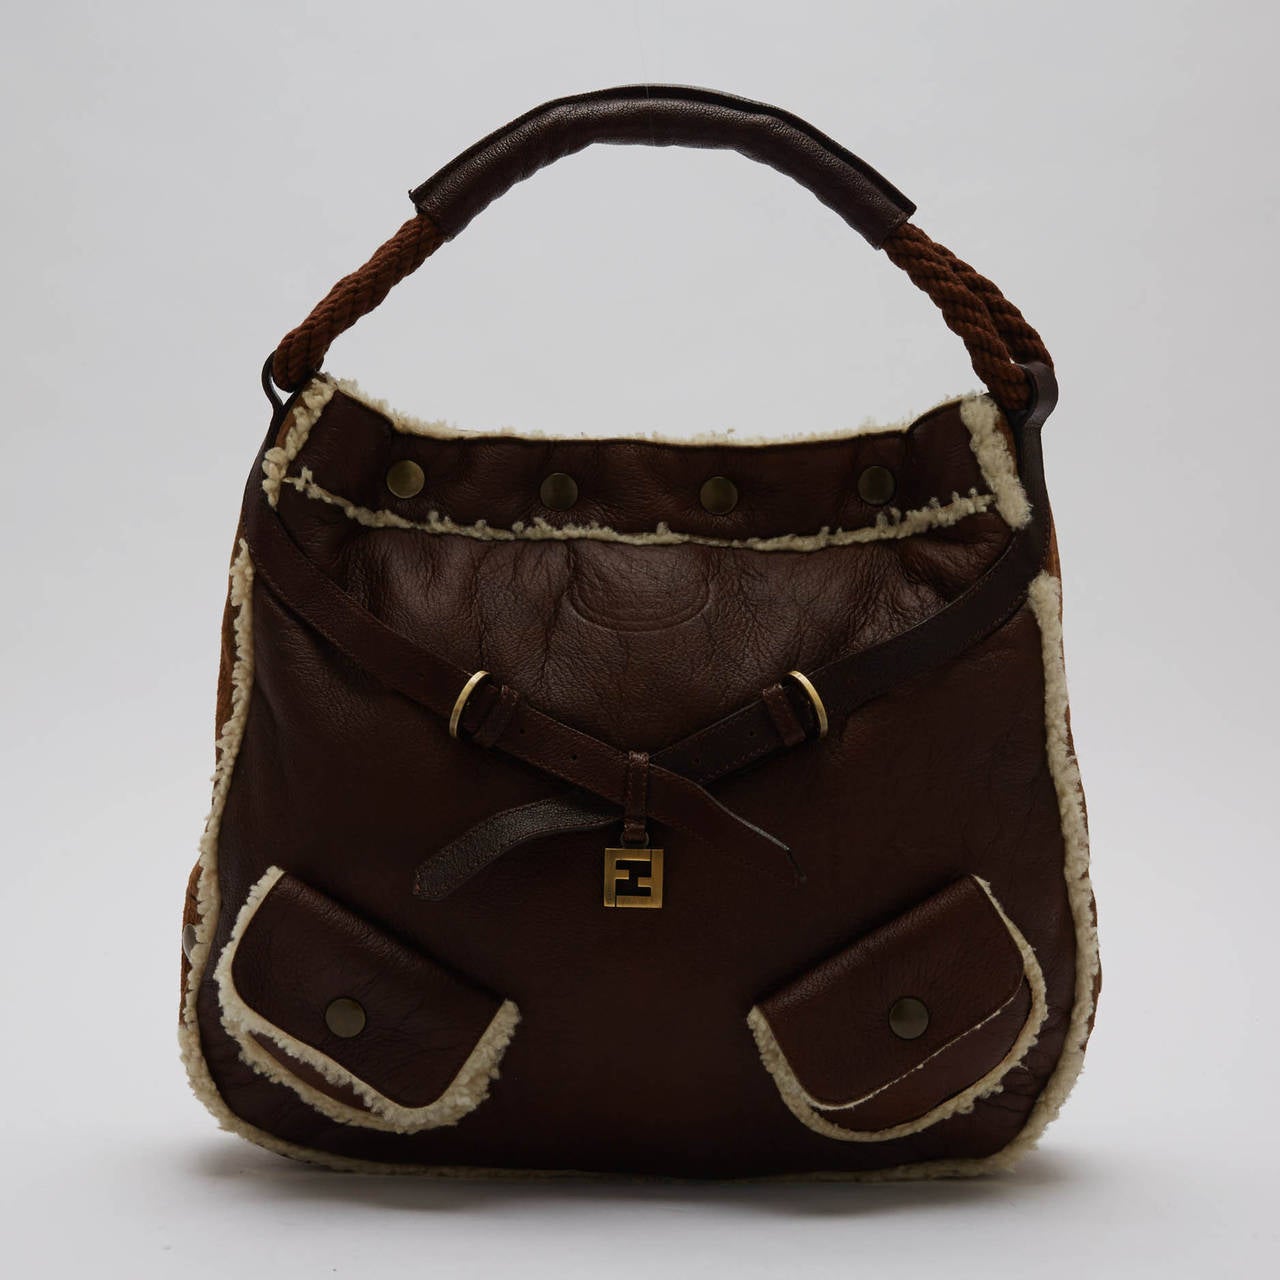 This unconventional Fendi Hobo Tote is made with soft shearling and suede at the sides. It features a brown smooth rope handle wrapped in soft leather, and is finished with brushed gold hardware. The blend of materials makes this an essential